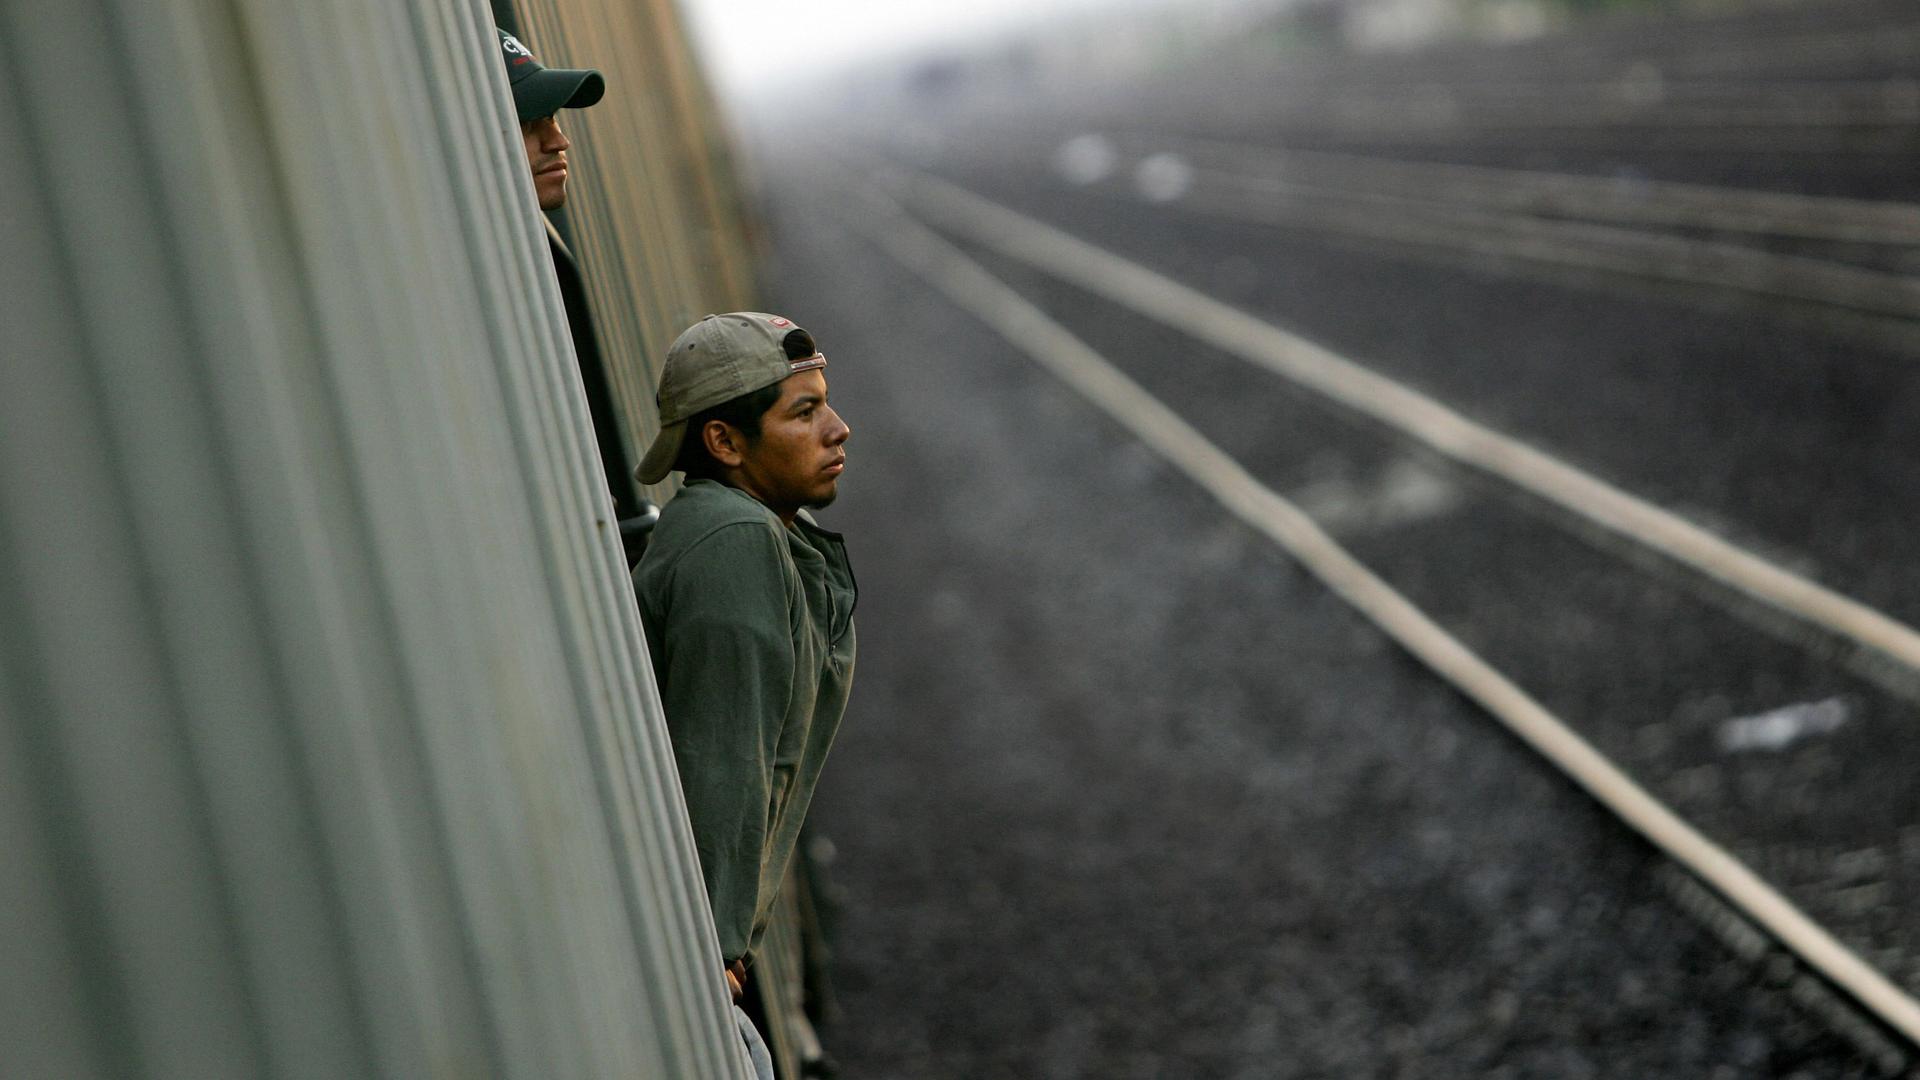 A migrant traveling to the border city of Nuevo Laredo, Mexico in 2006. This fiscal year, US officials have detained more than 52,000 unaccompanied minors and 39,000 women with children along the US-Mexico border.